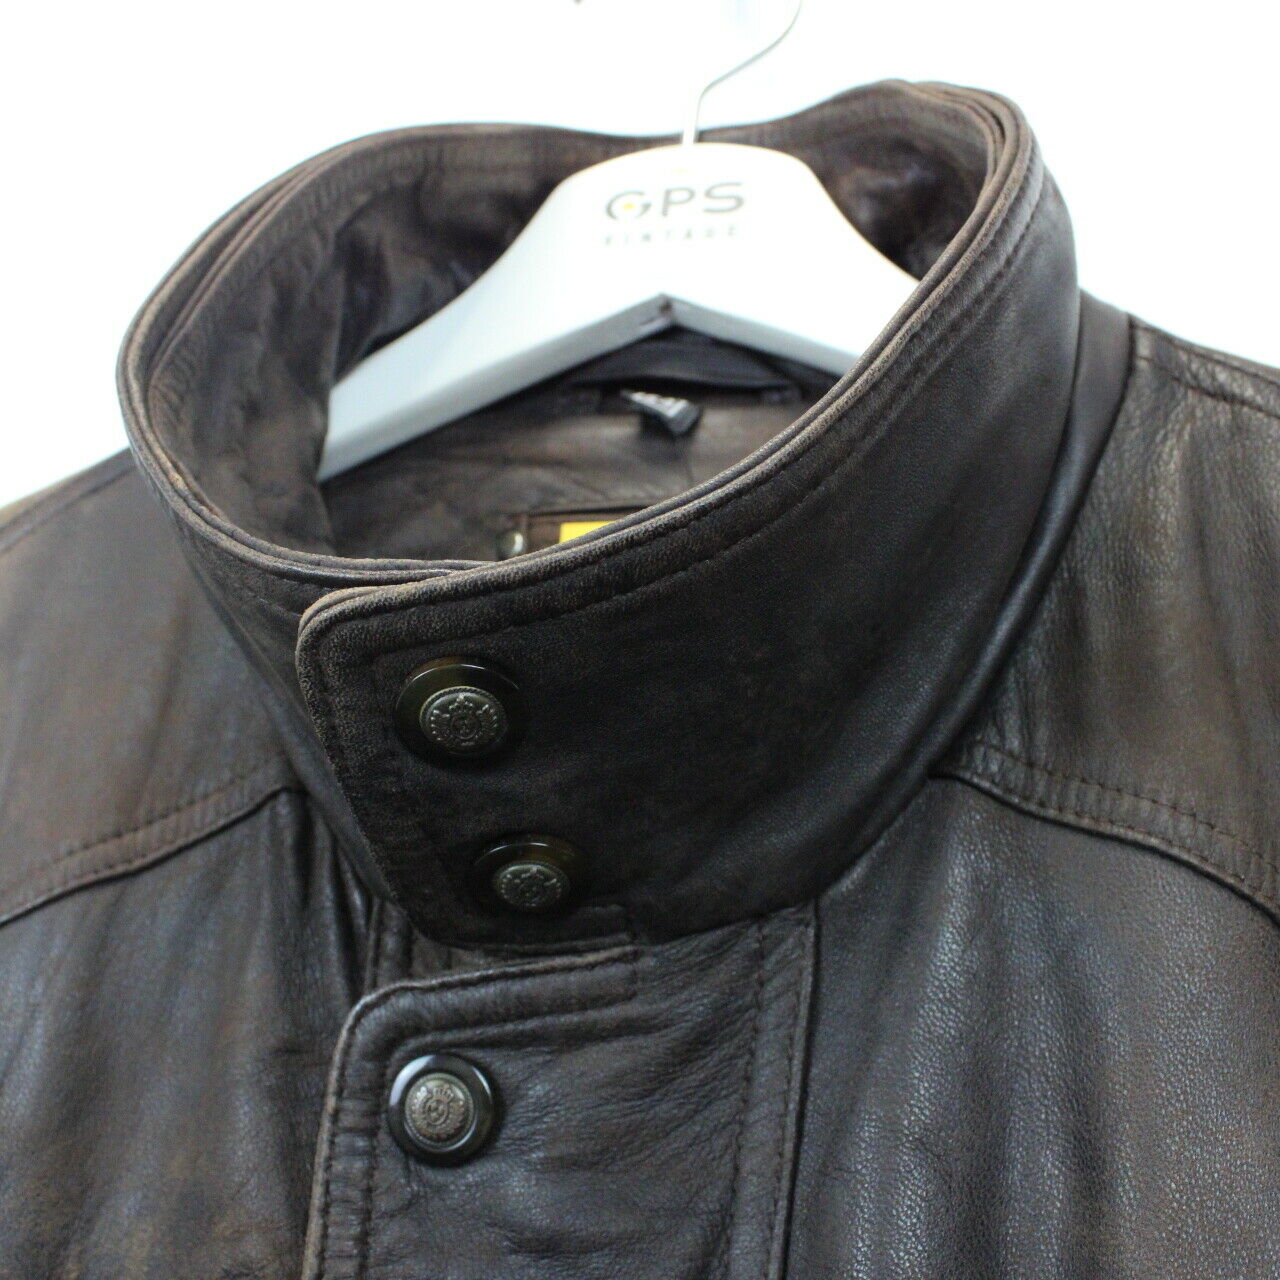 90s Leather Aviator Jacket Brown | XL